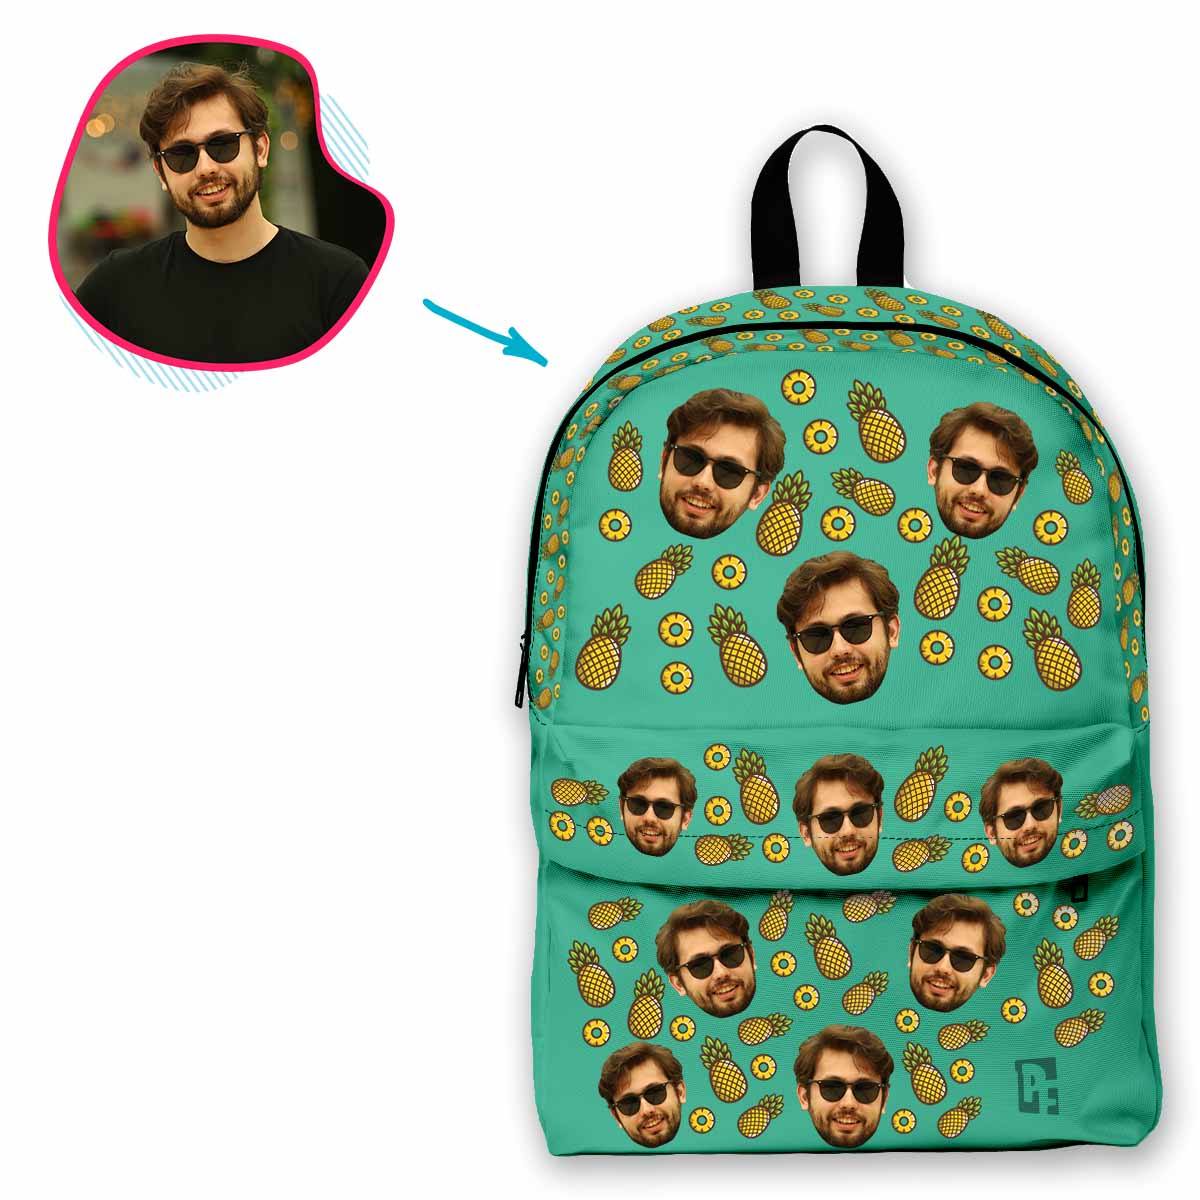 mint Fruits classic backpack personalized with photo of face printed on it